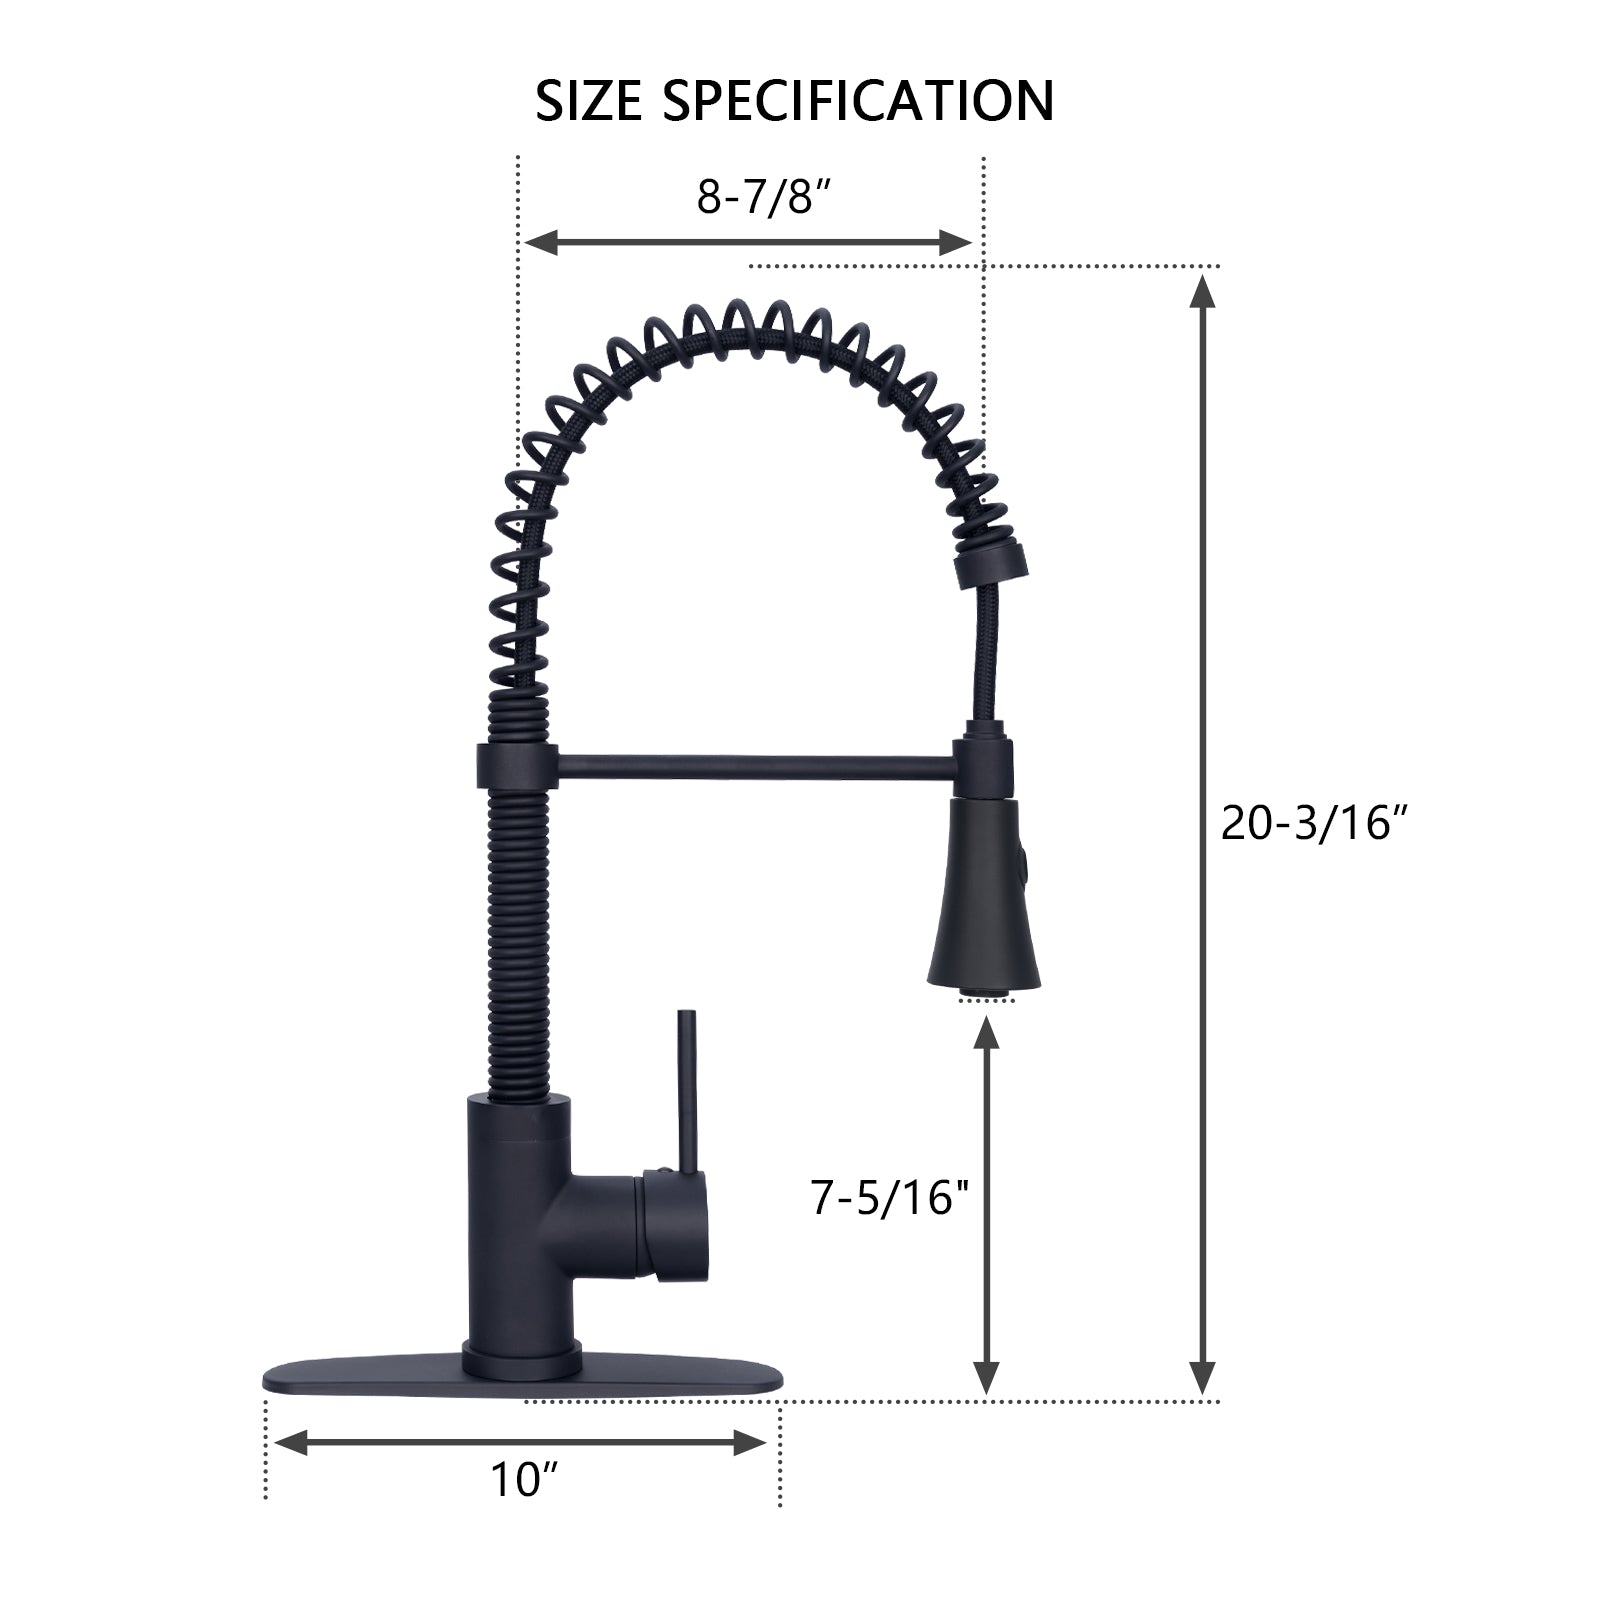 Matte Black Pre-Rinse Spring Kitchen Faucet, Single Level Solid Brass Kitchen Sink Faucets with Pull Down Sprayer - AK96516A1-MB